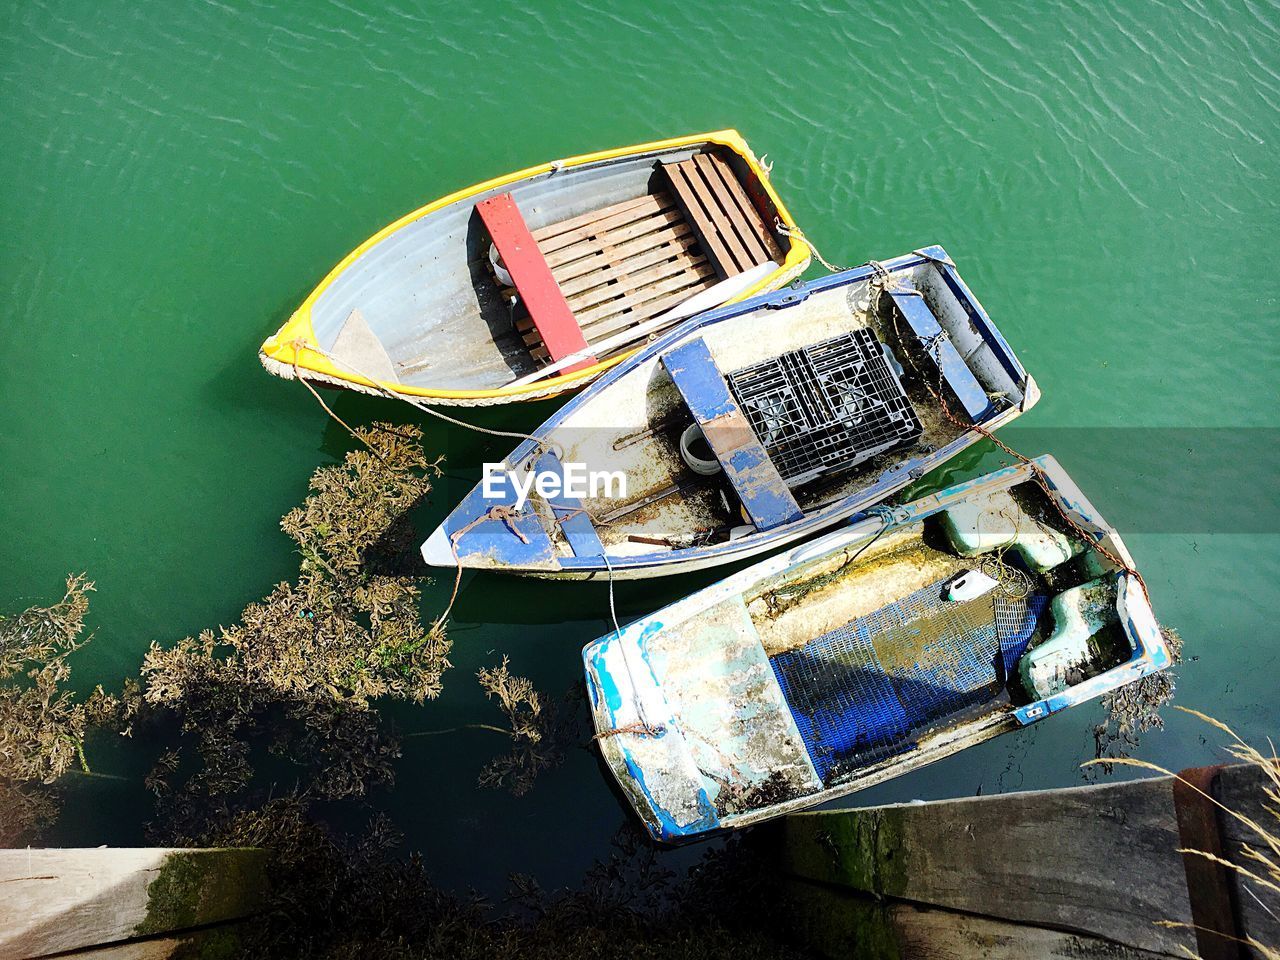 HIGH ANGLE VIEW OF ABANDONED BOAT MOORED BY LAKE